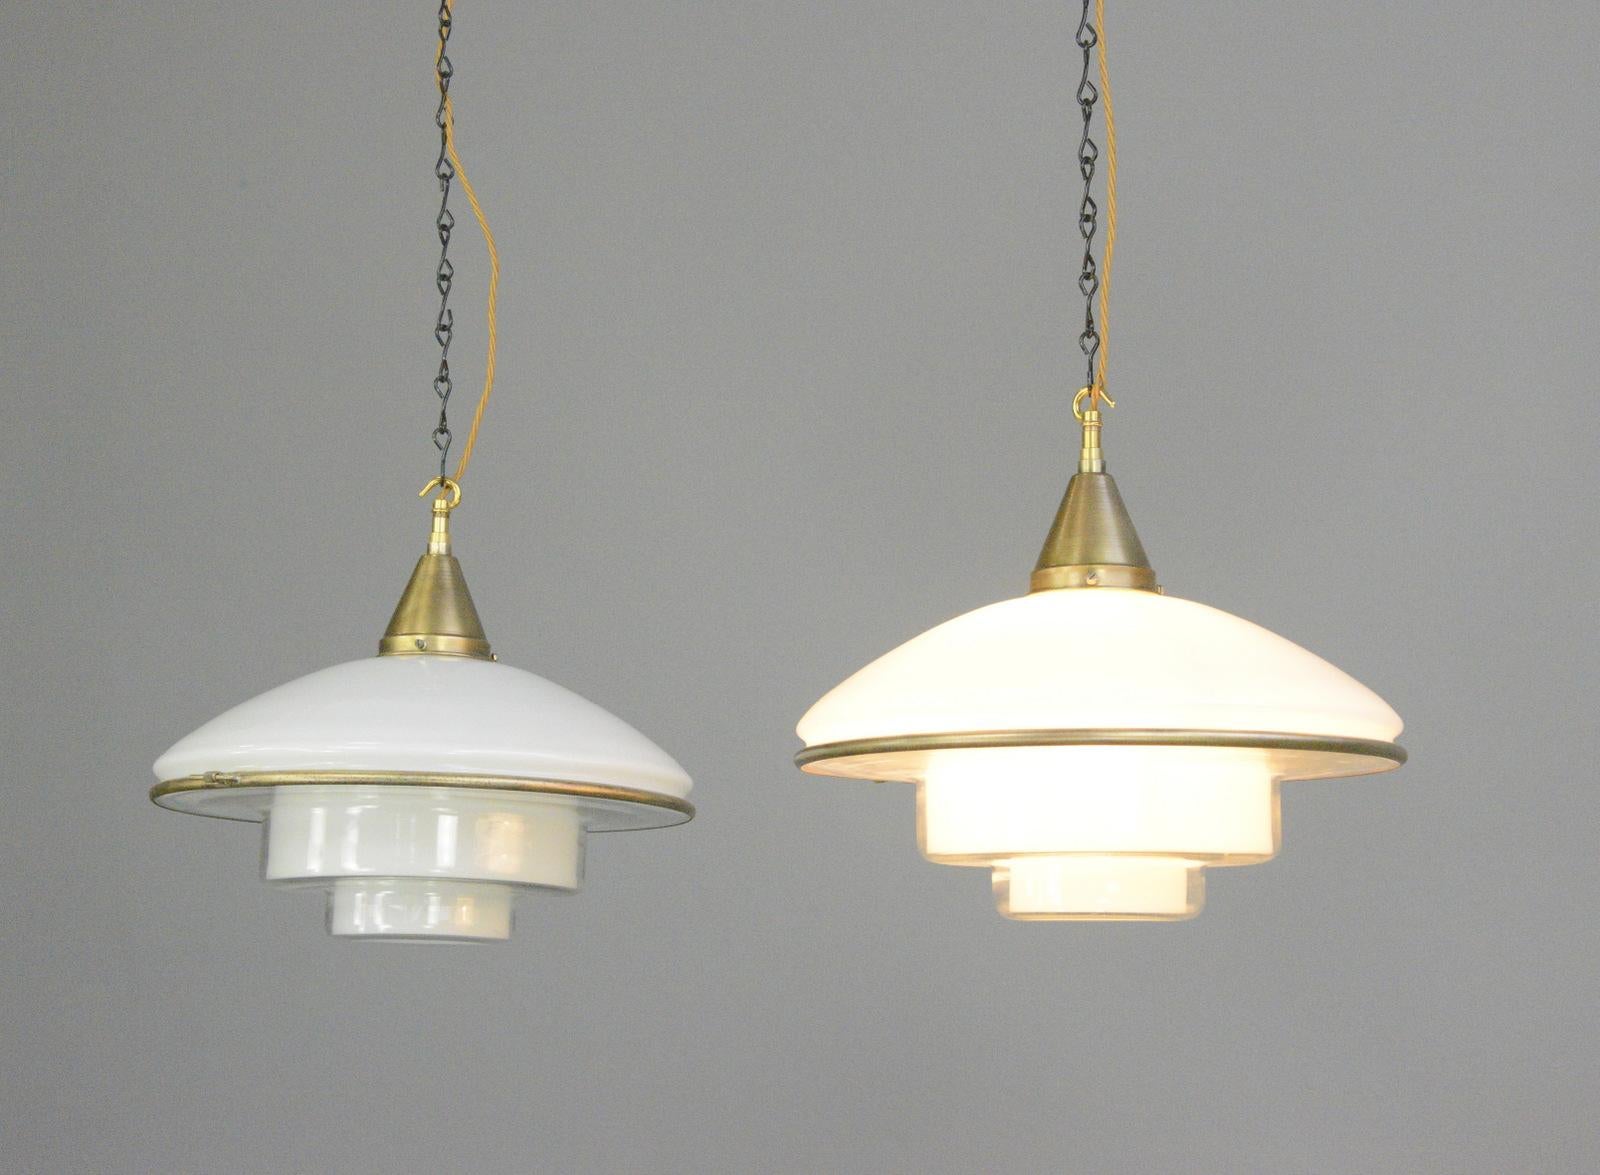 Sistrah P4 Pendant Lights by Otto Muller, Circa 1930s For Sale 4